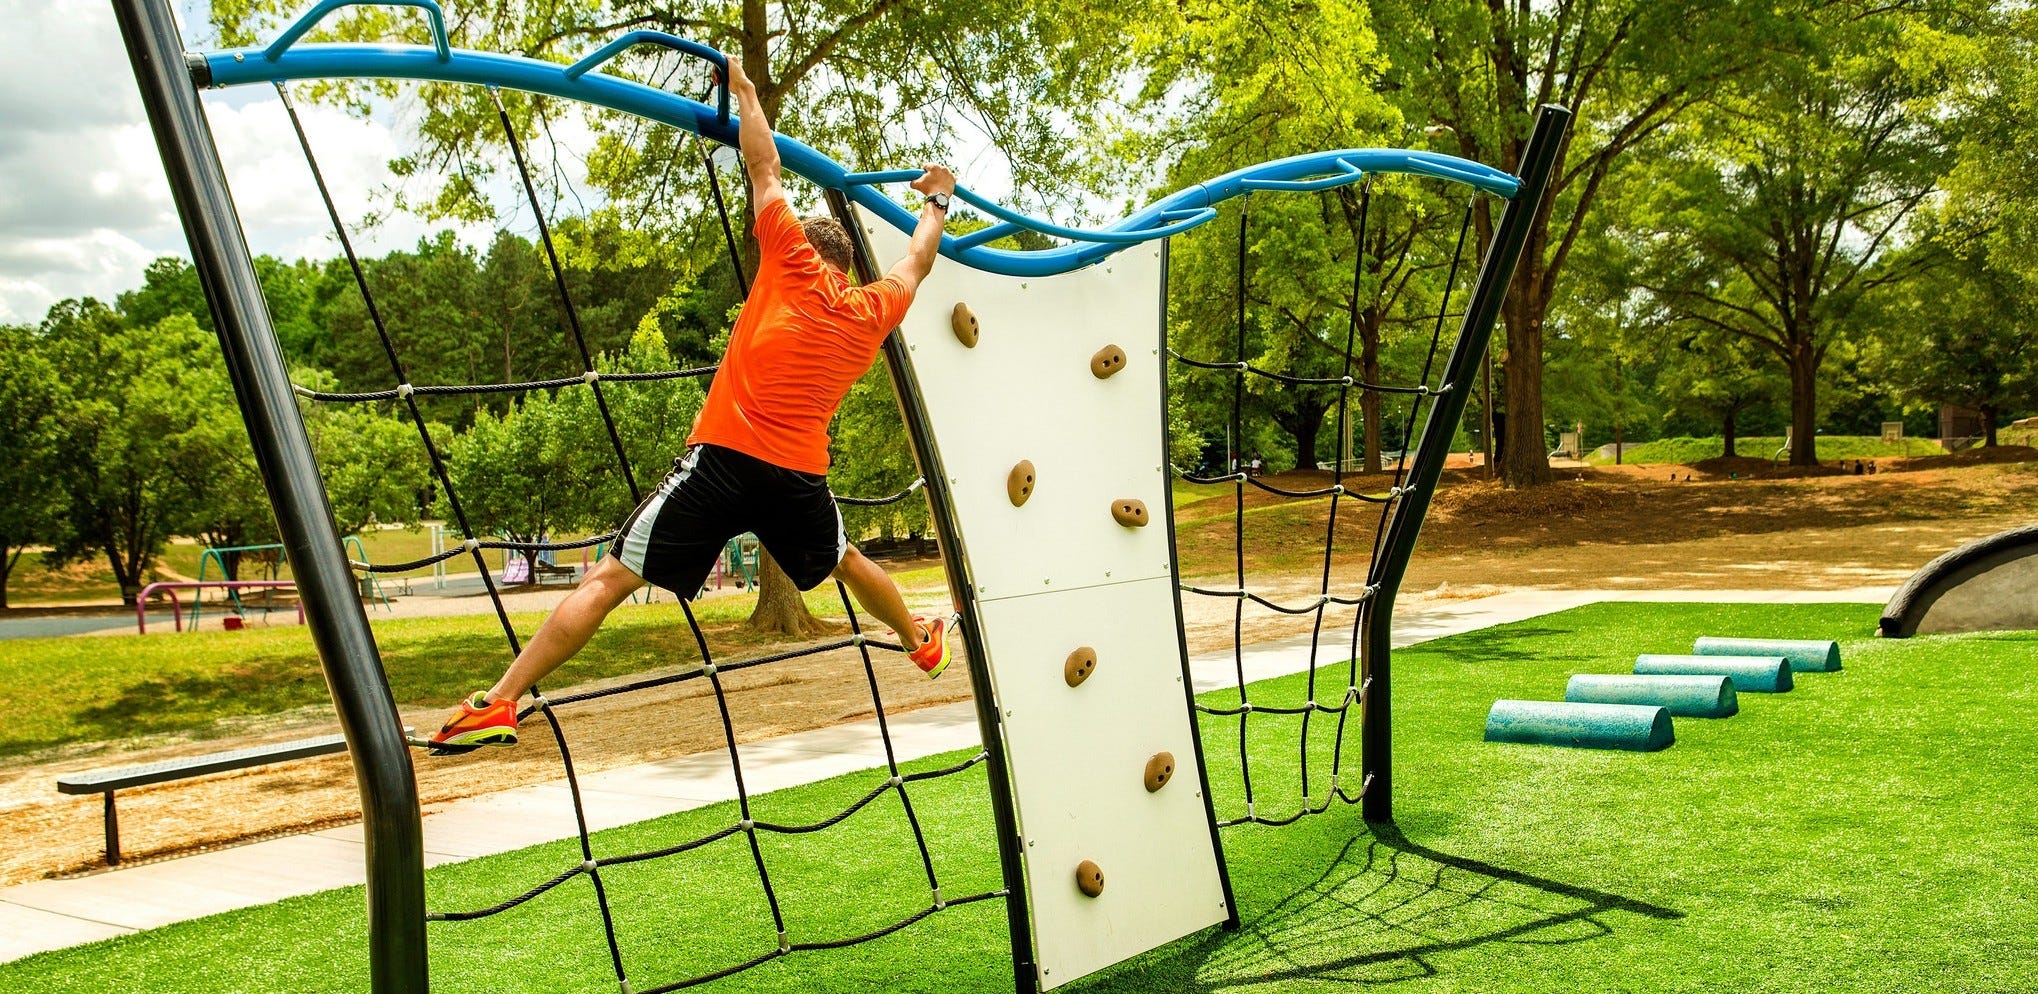 GameTime™ Brings the Obstacle Course Experience to Community Parks